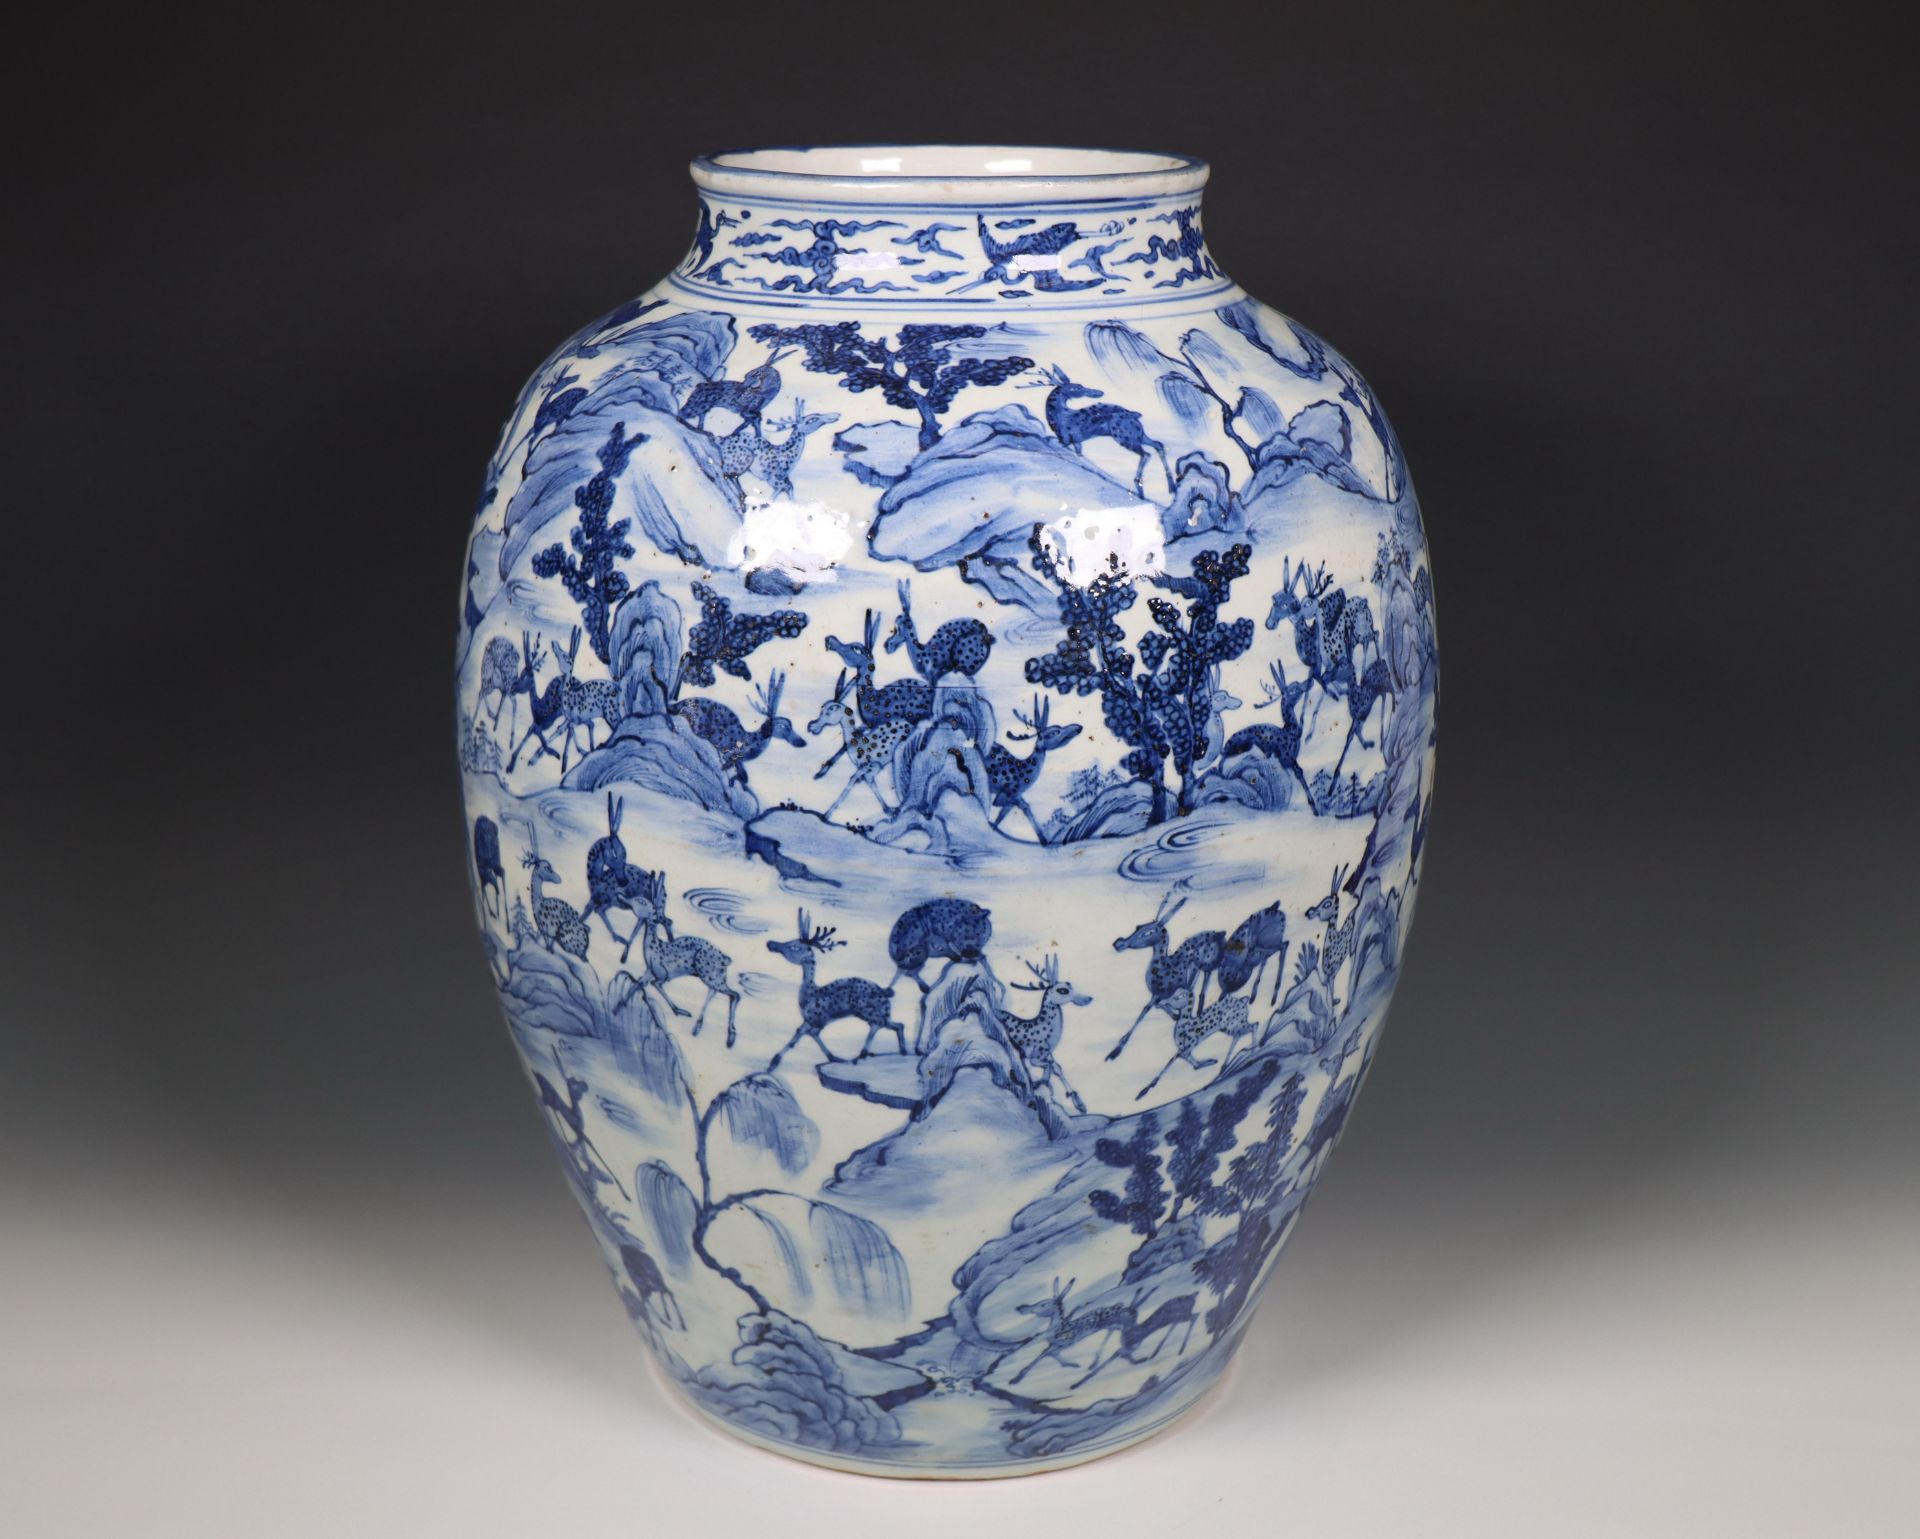 China, blue and white porcelain 'one hundred deer' baluster vase, late Qing dynasty (1644-1912), - Image 6 of 6